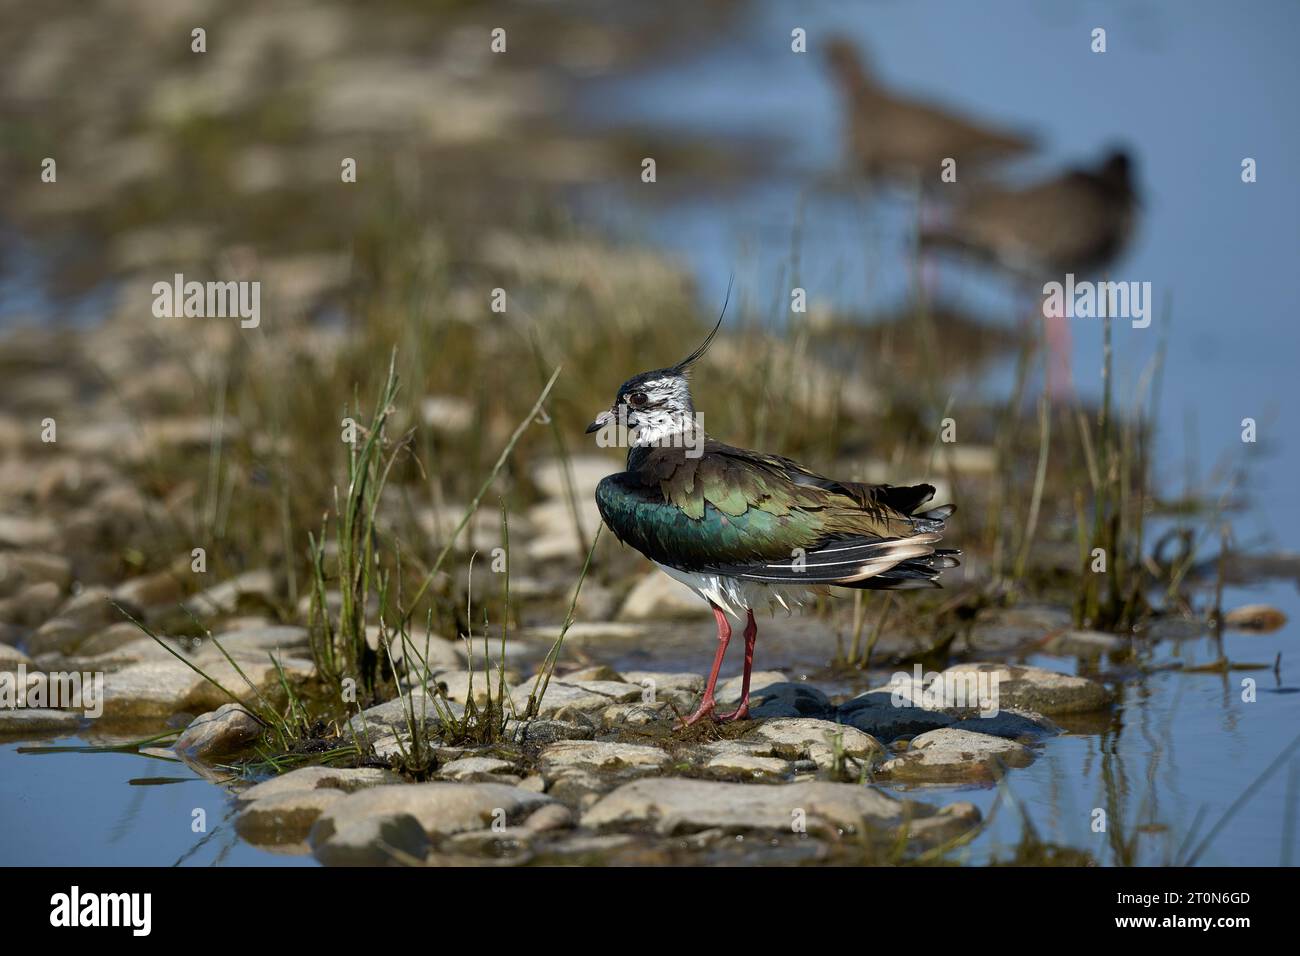 Lapwing at a bathing pool Stock Photo